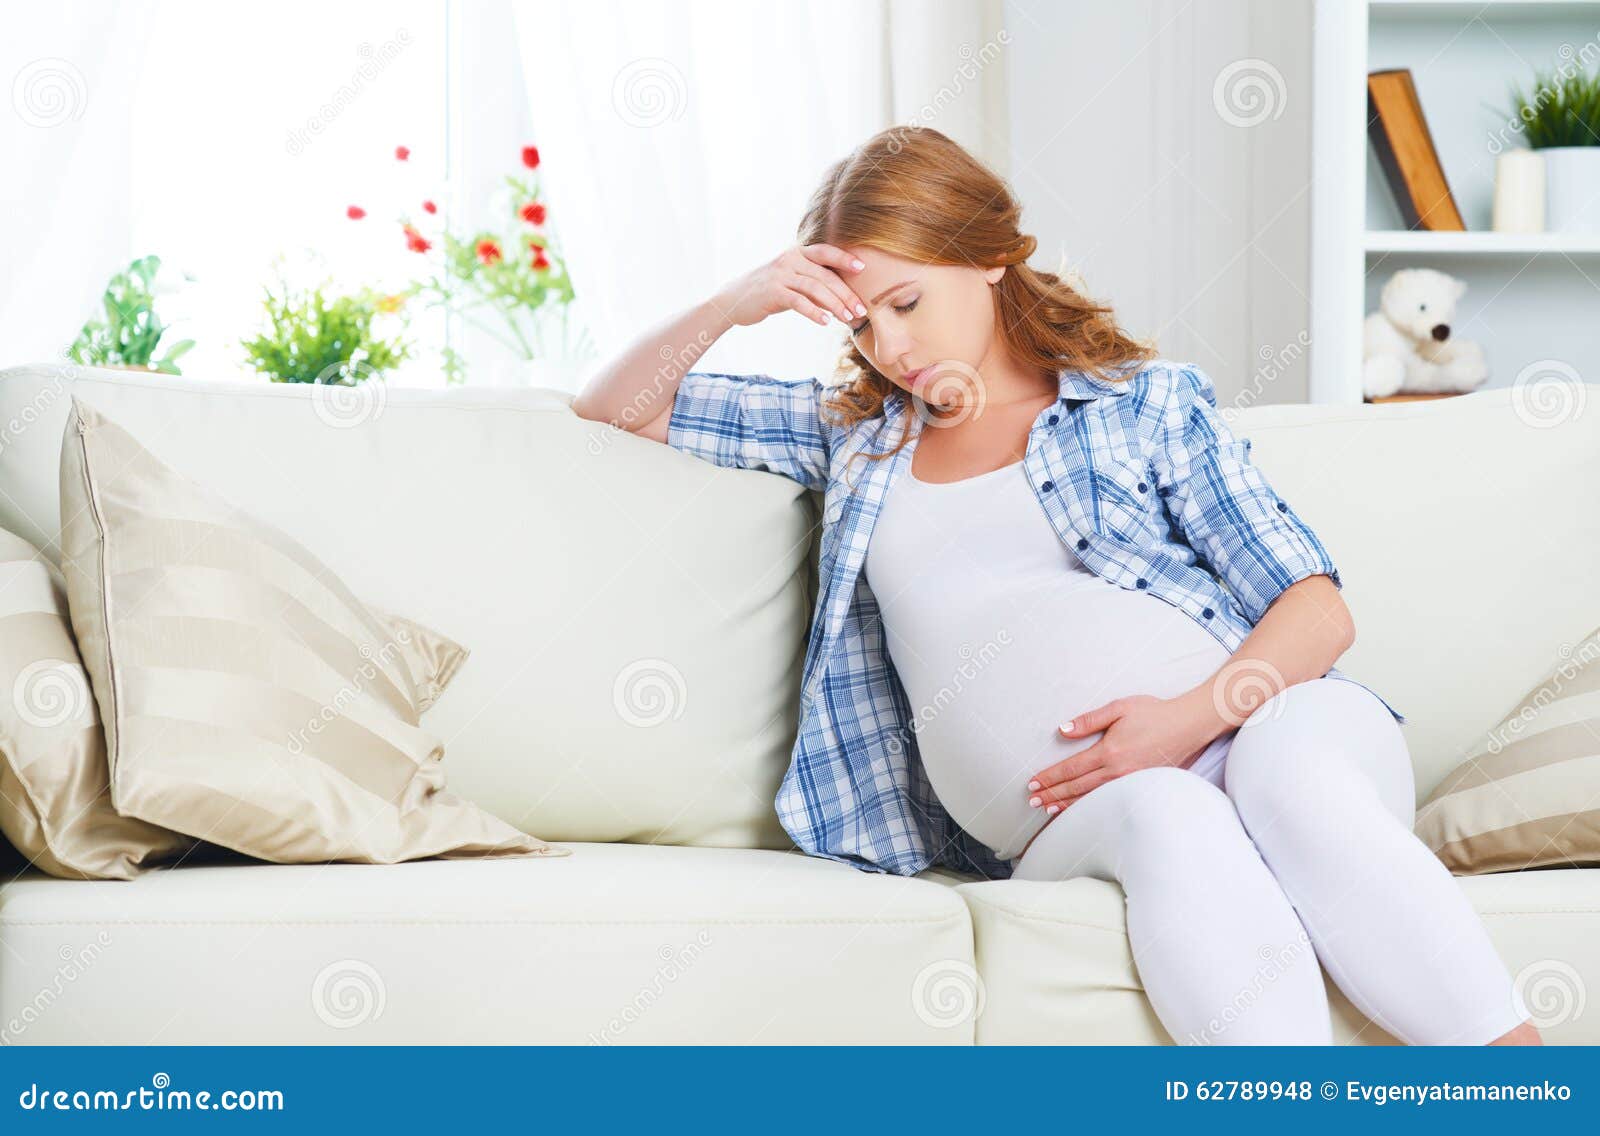 pregnant woman with headache and pain